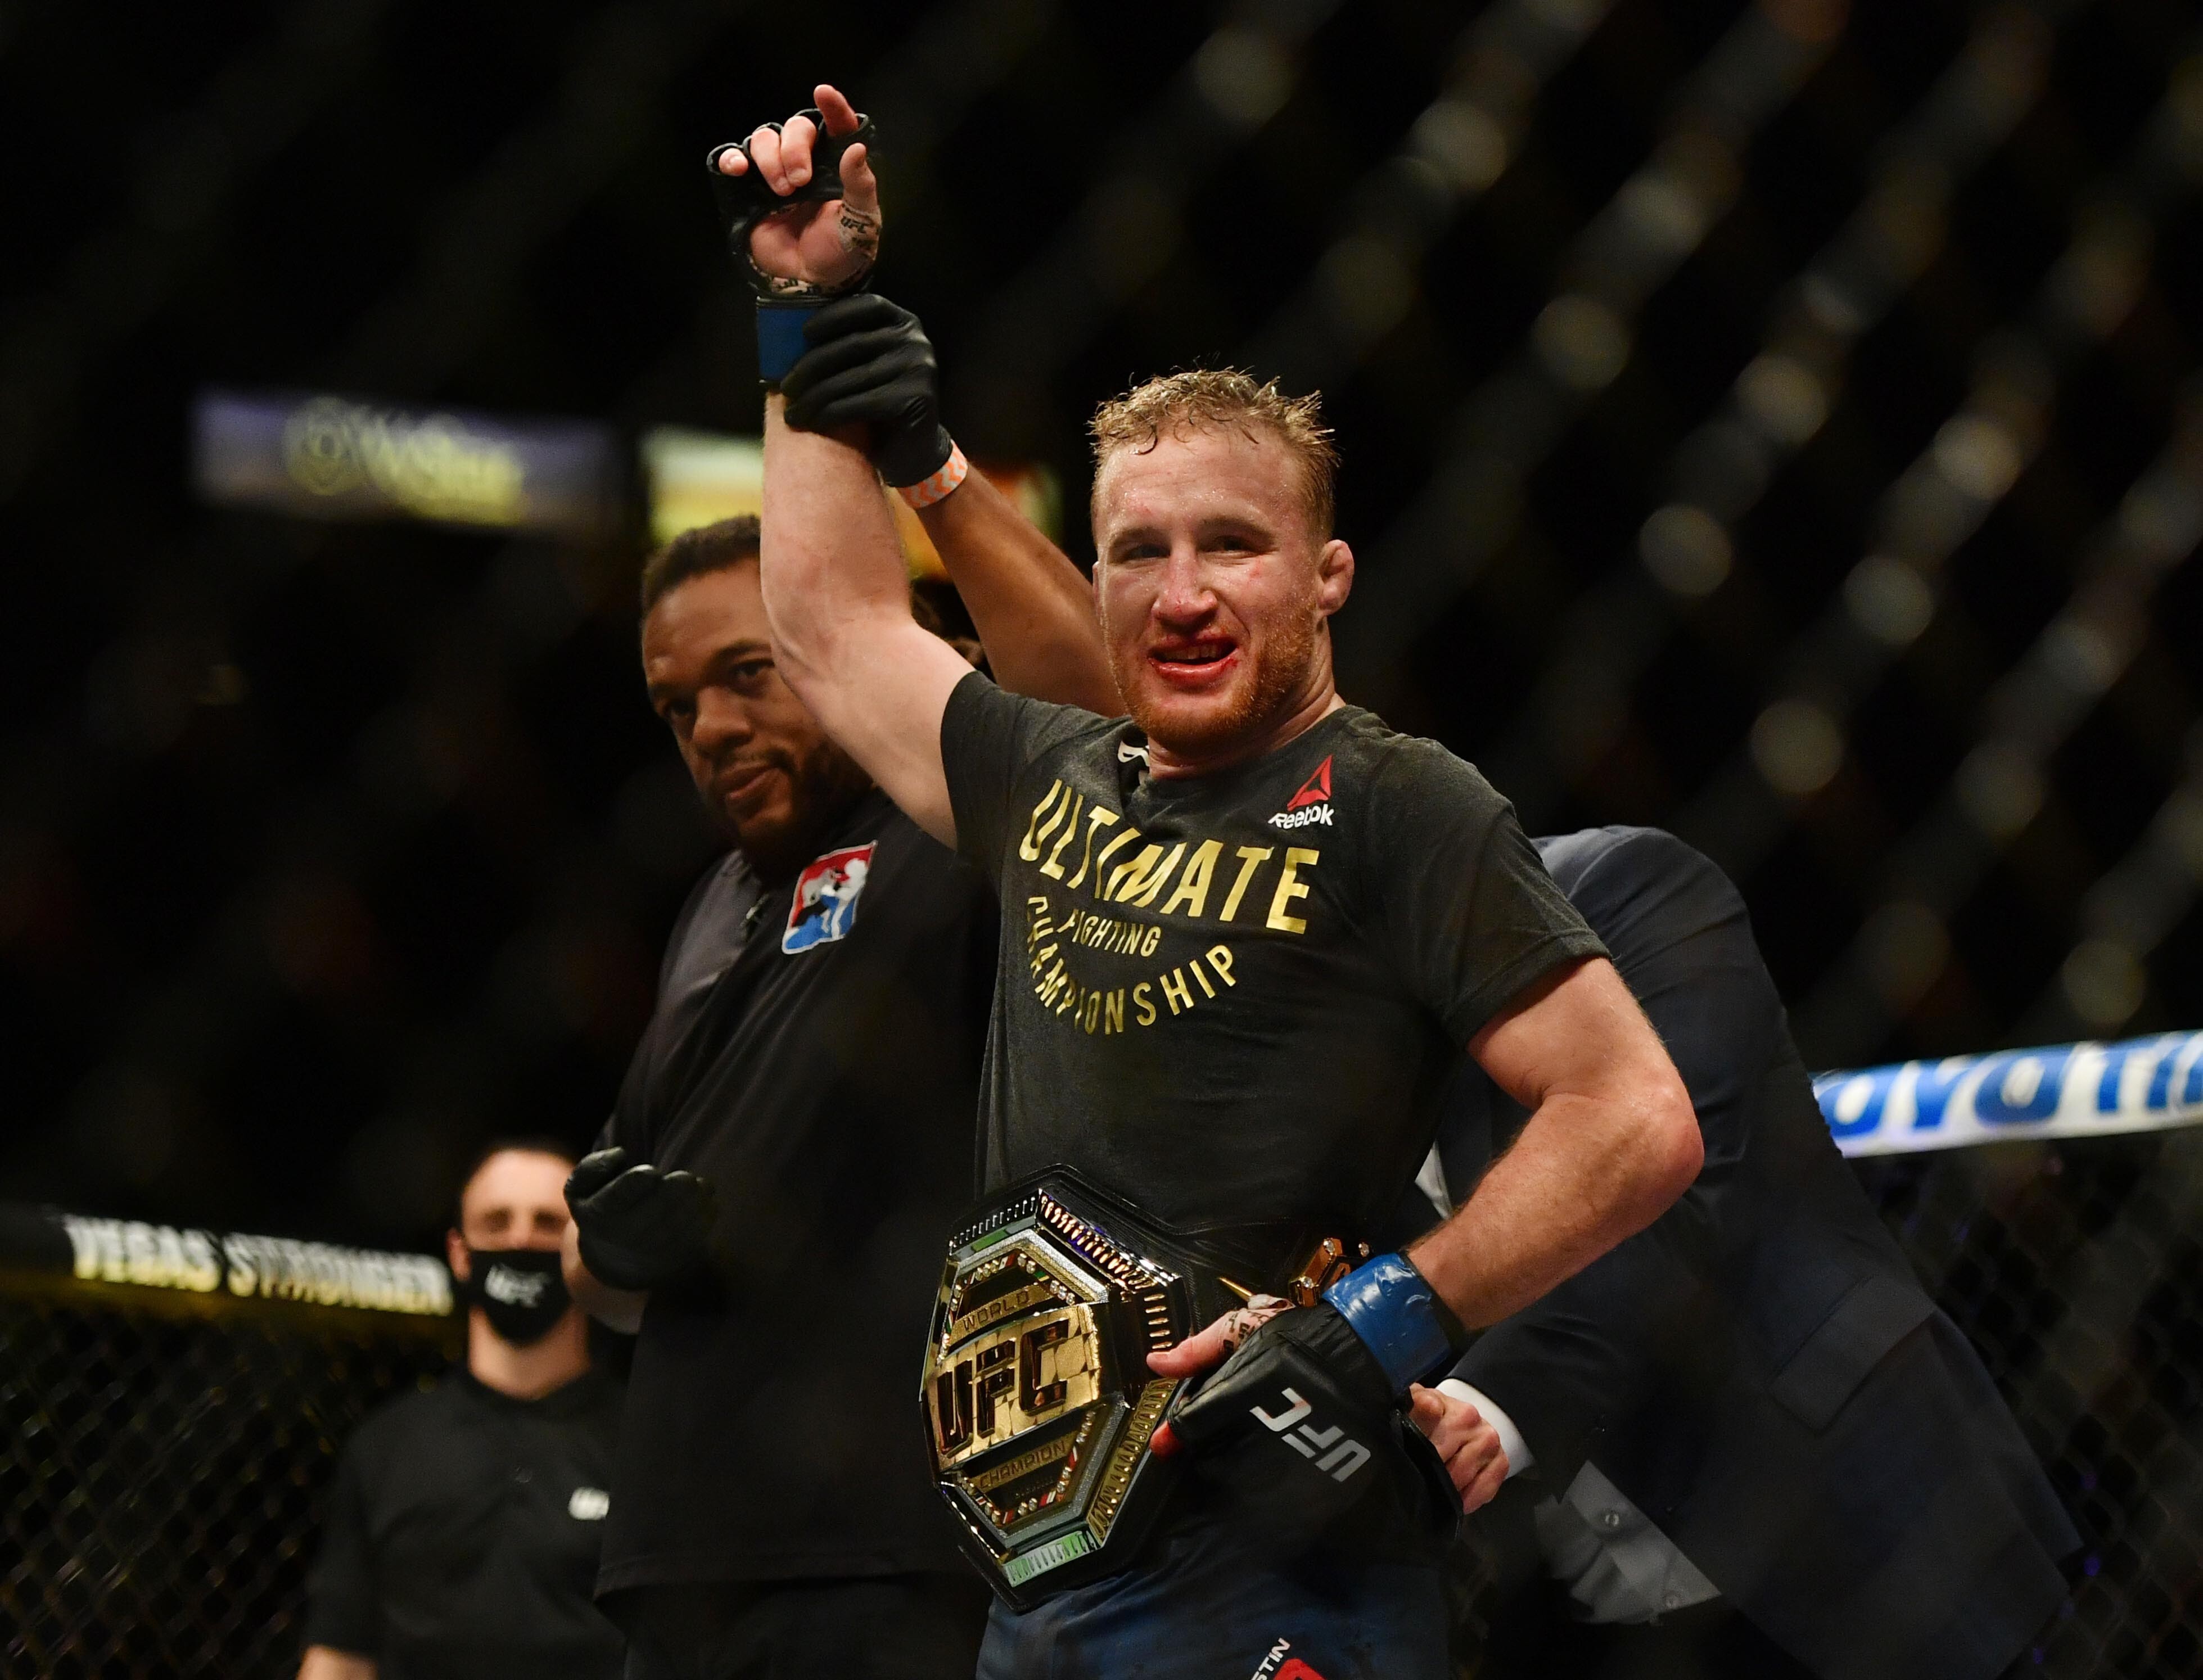 Dana White puts the interim lightweight belt on Justin Gaethje after his win against Tony Ferguson at UFC 249. Photo: USA TODAY Sports